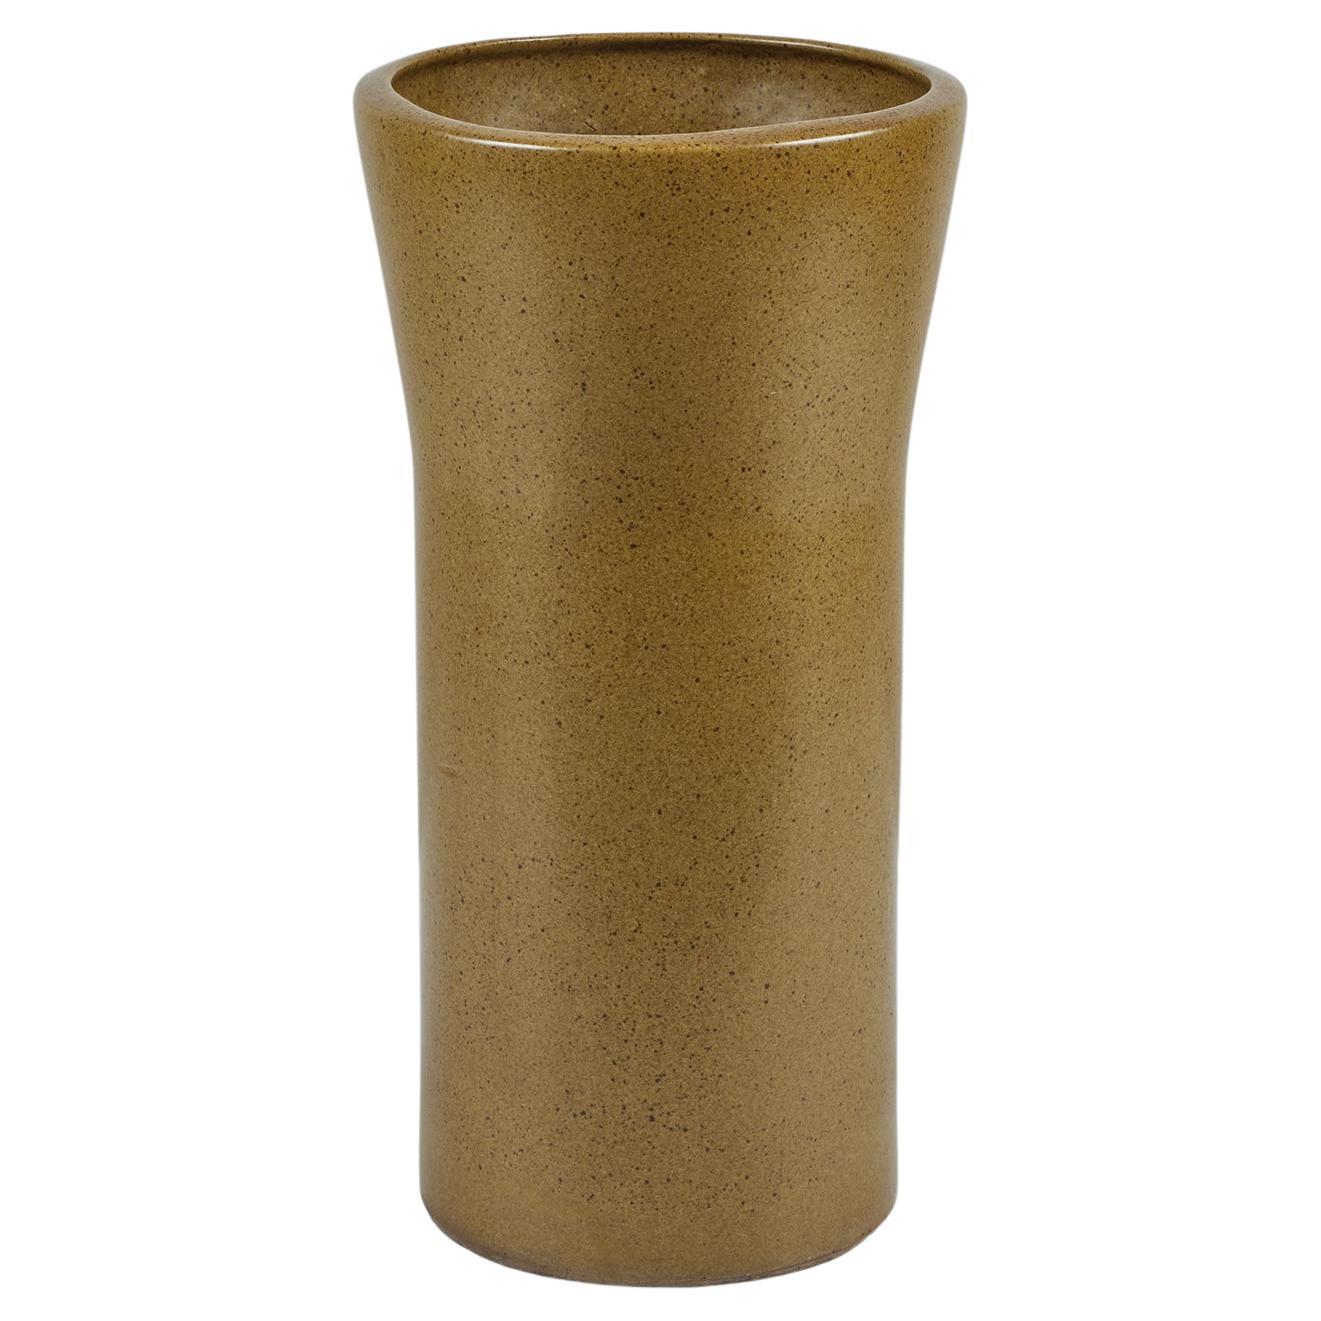 David Cressey Pro/Artisan Sand Urn for Architectural Pottery For Sale